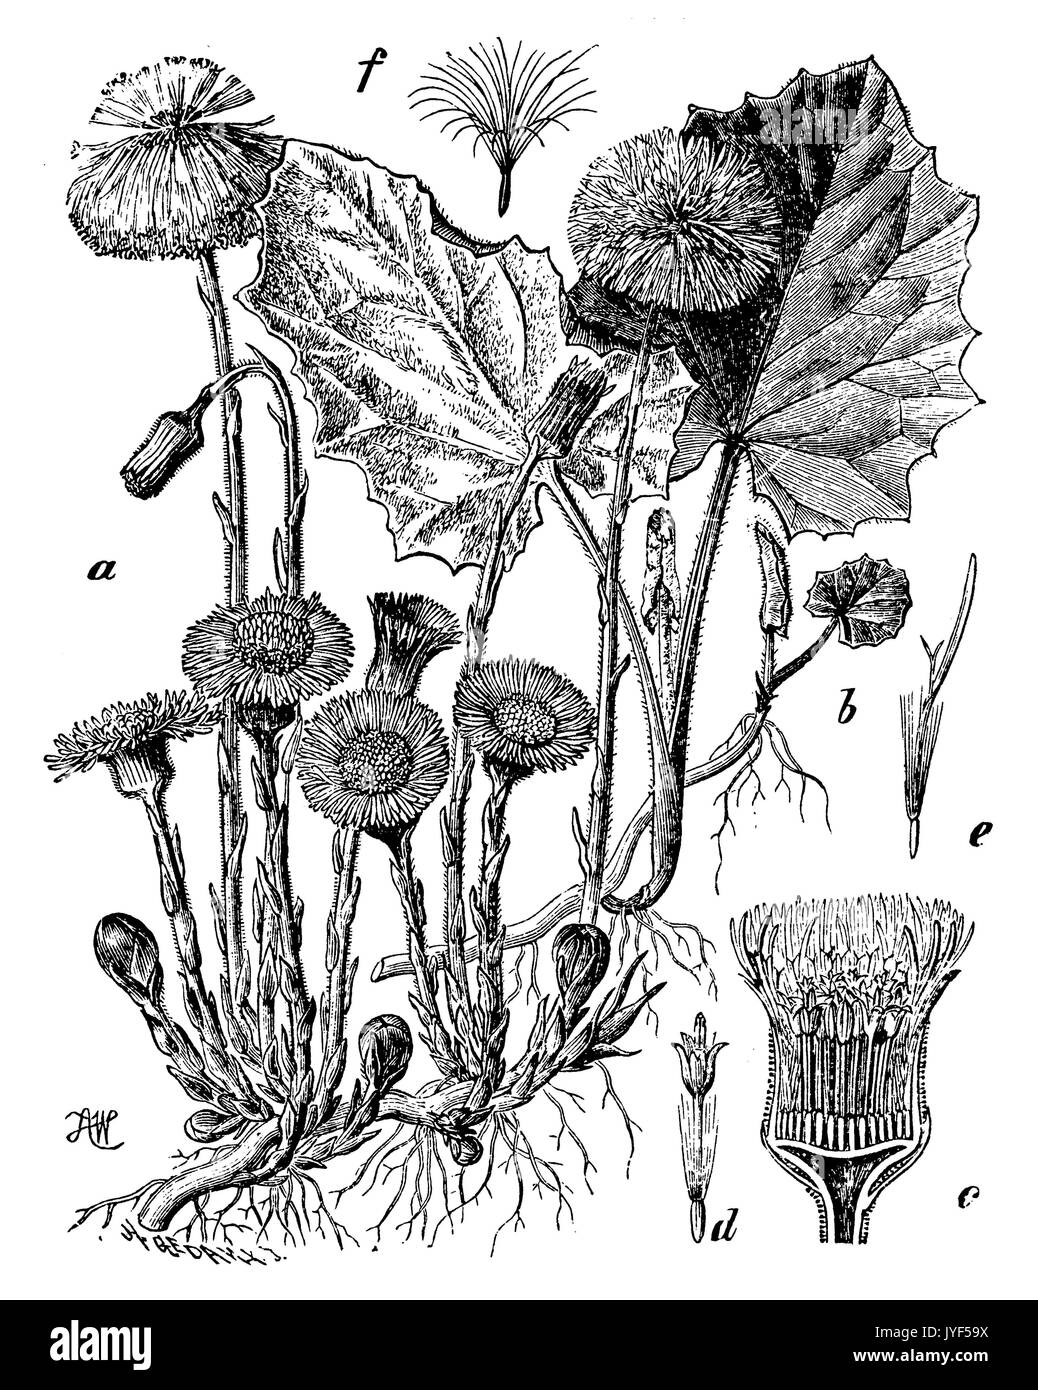 coltsfoot Stock Photo